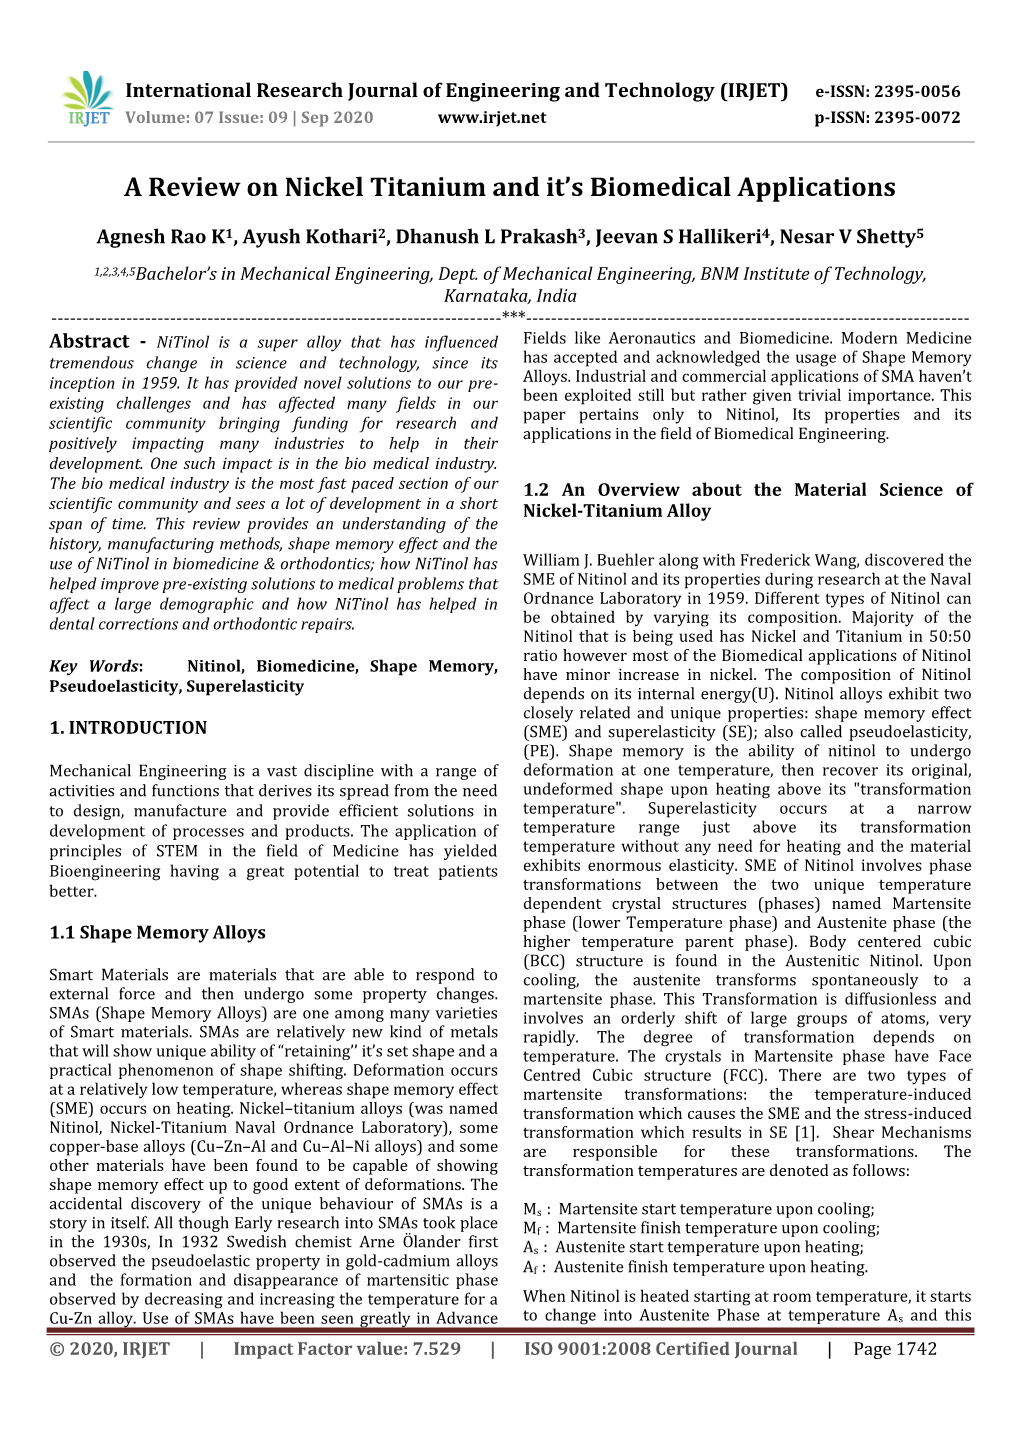 A Review on Nickel Titanium and It's Biomedical Applications